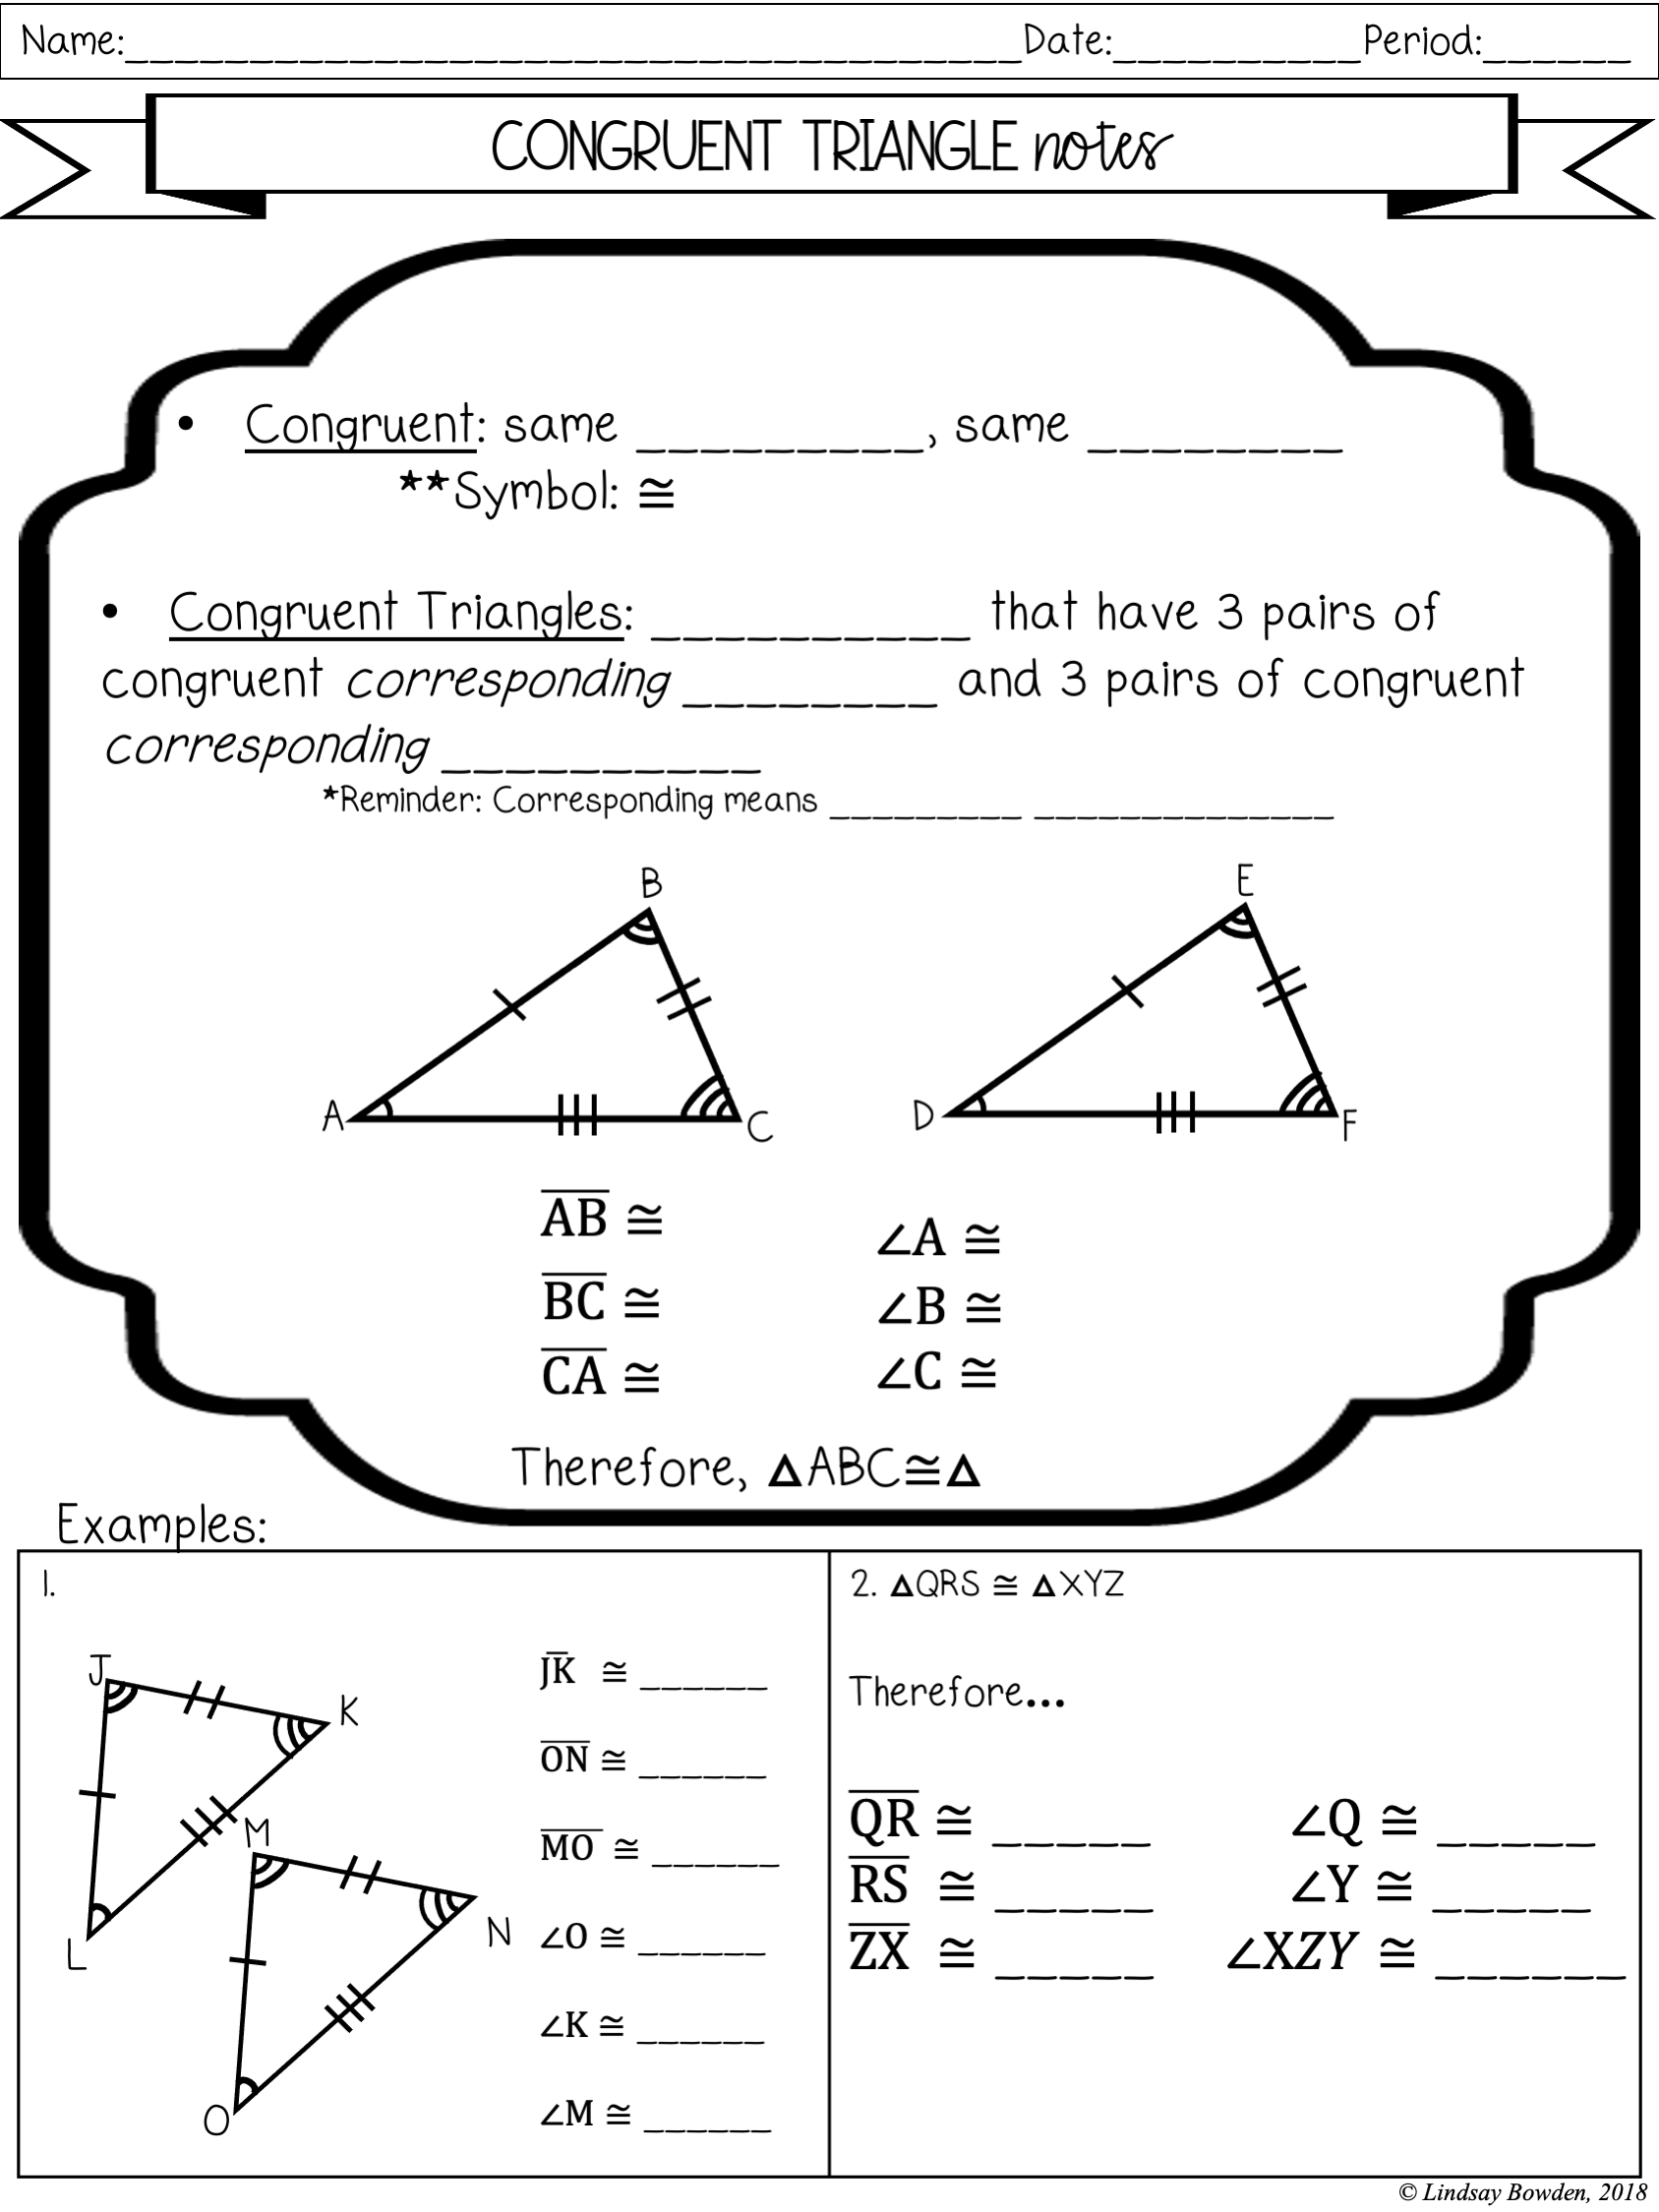 Congruent Triangles Notes and Worksheets - Lindsay Bowden With Geometry Worksheet Congruent Triangles